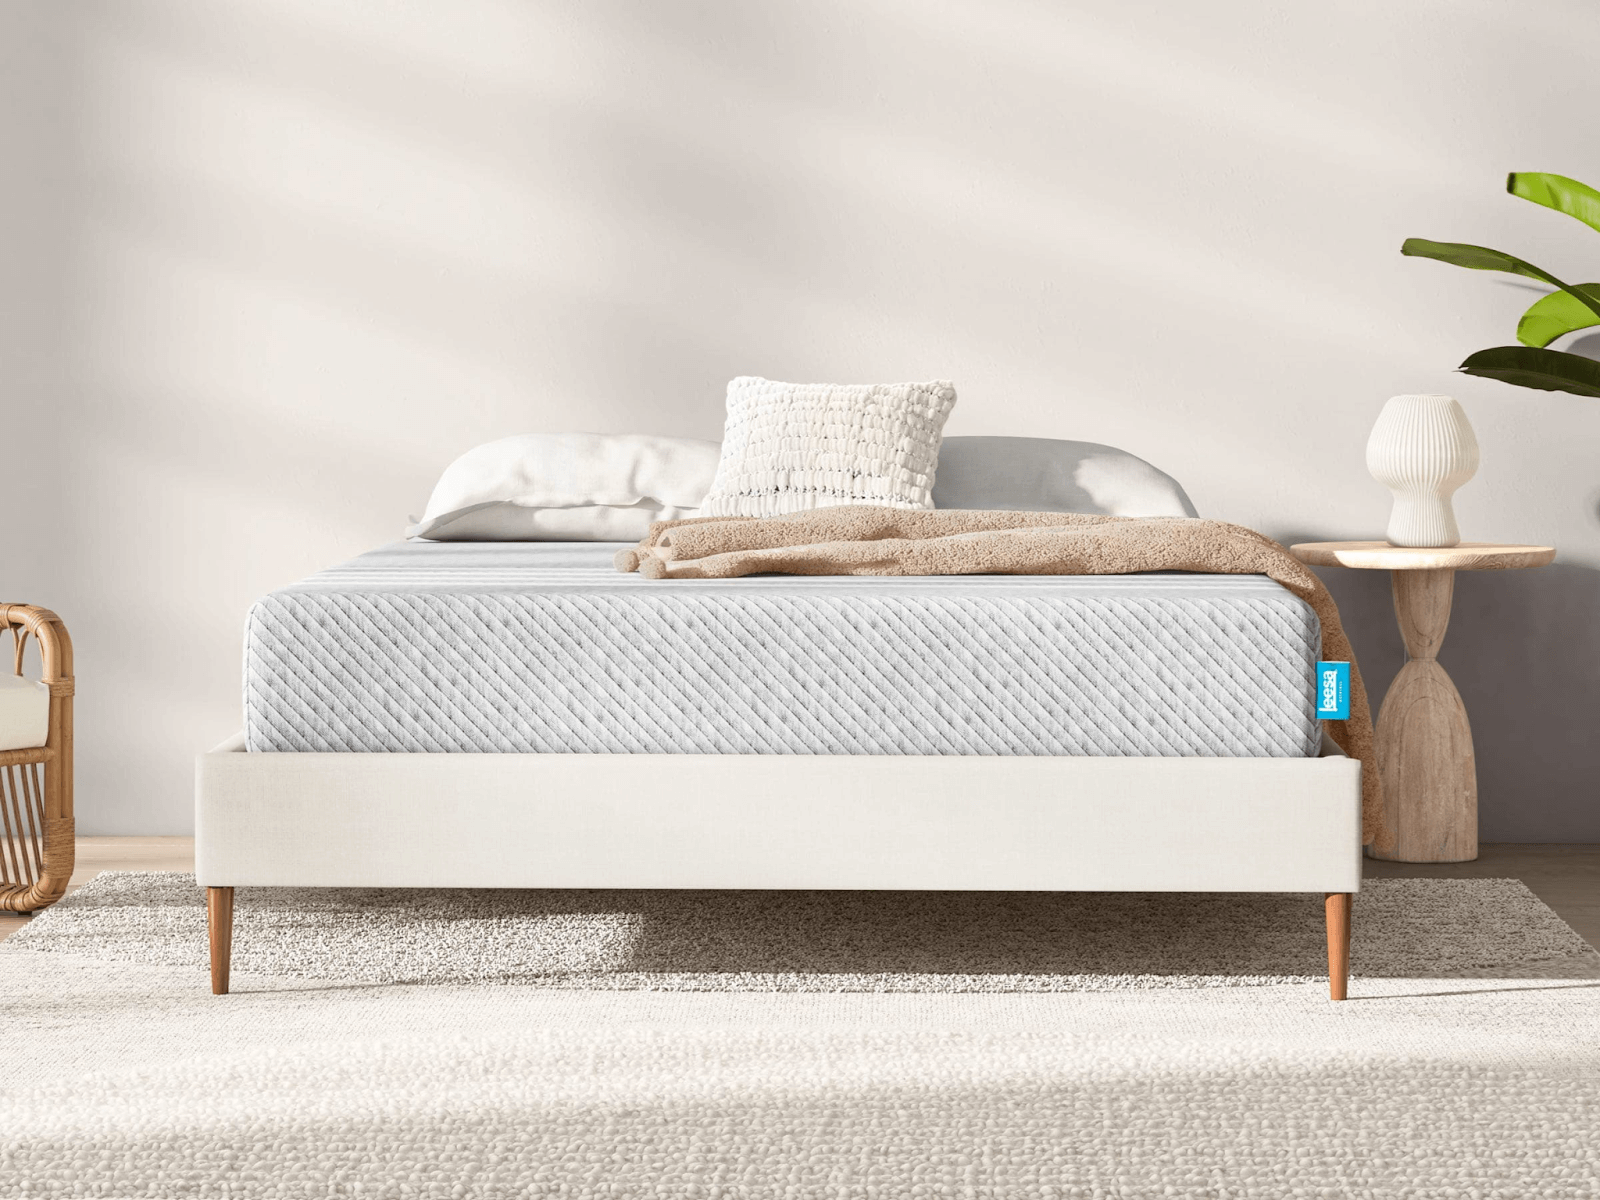 Does Leesa mattress have fiberglass? Yes, however, it does not have a fire-retardant sock.